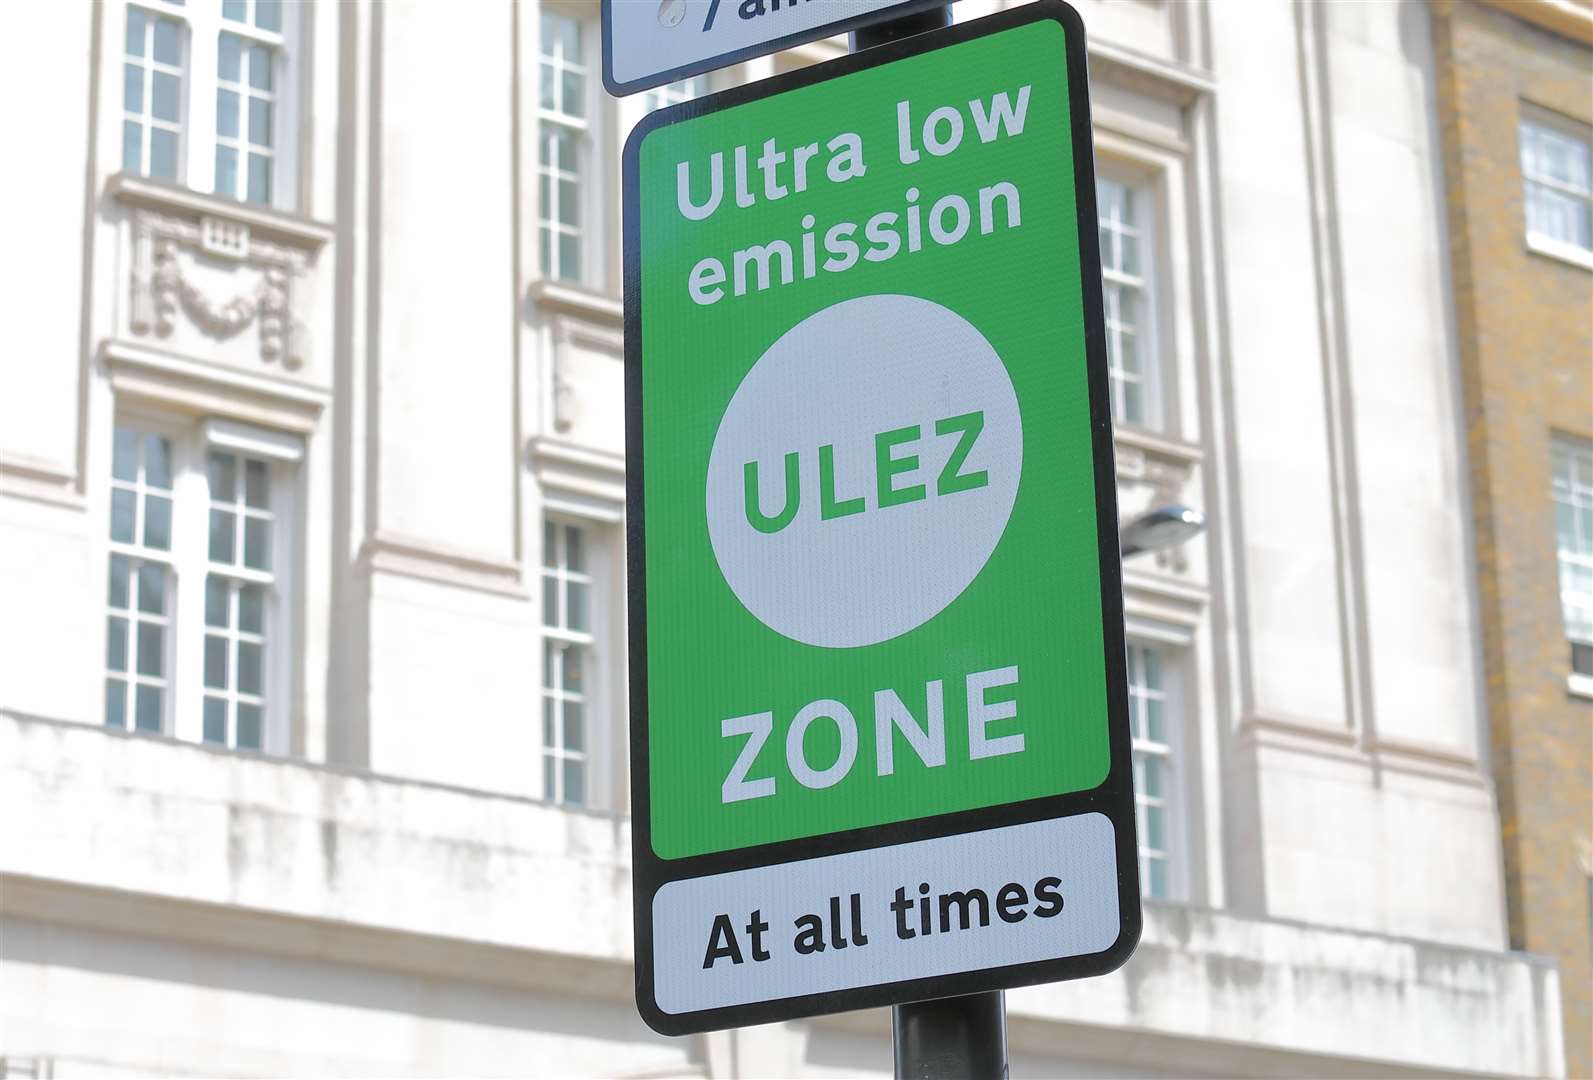 ULEZ was extended through Greater London this summer – bringing it to Kent’s borders for the first time